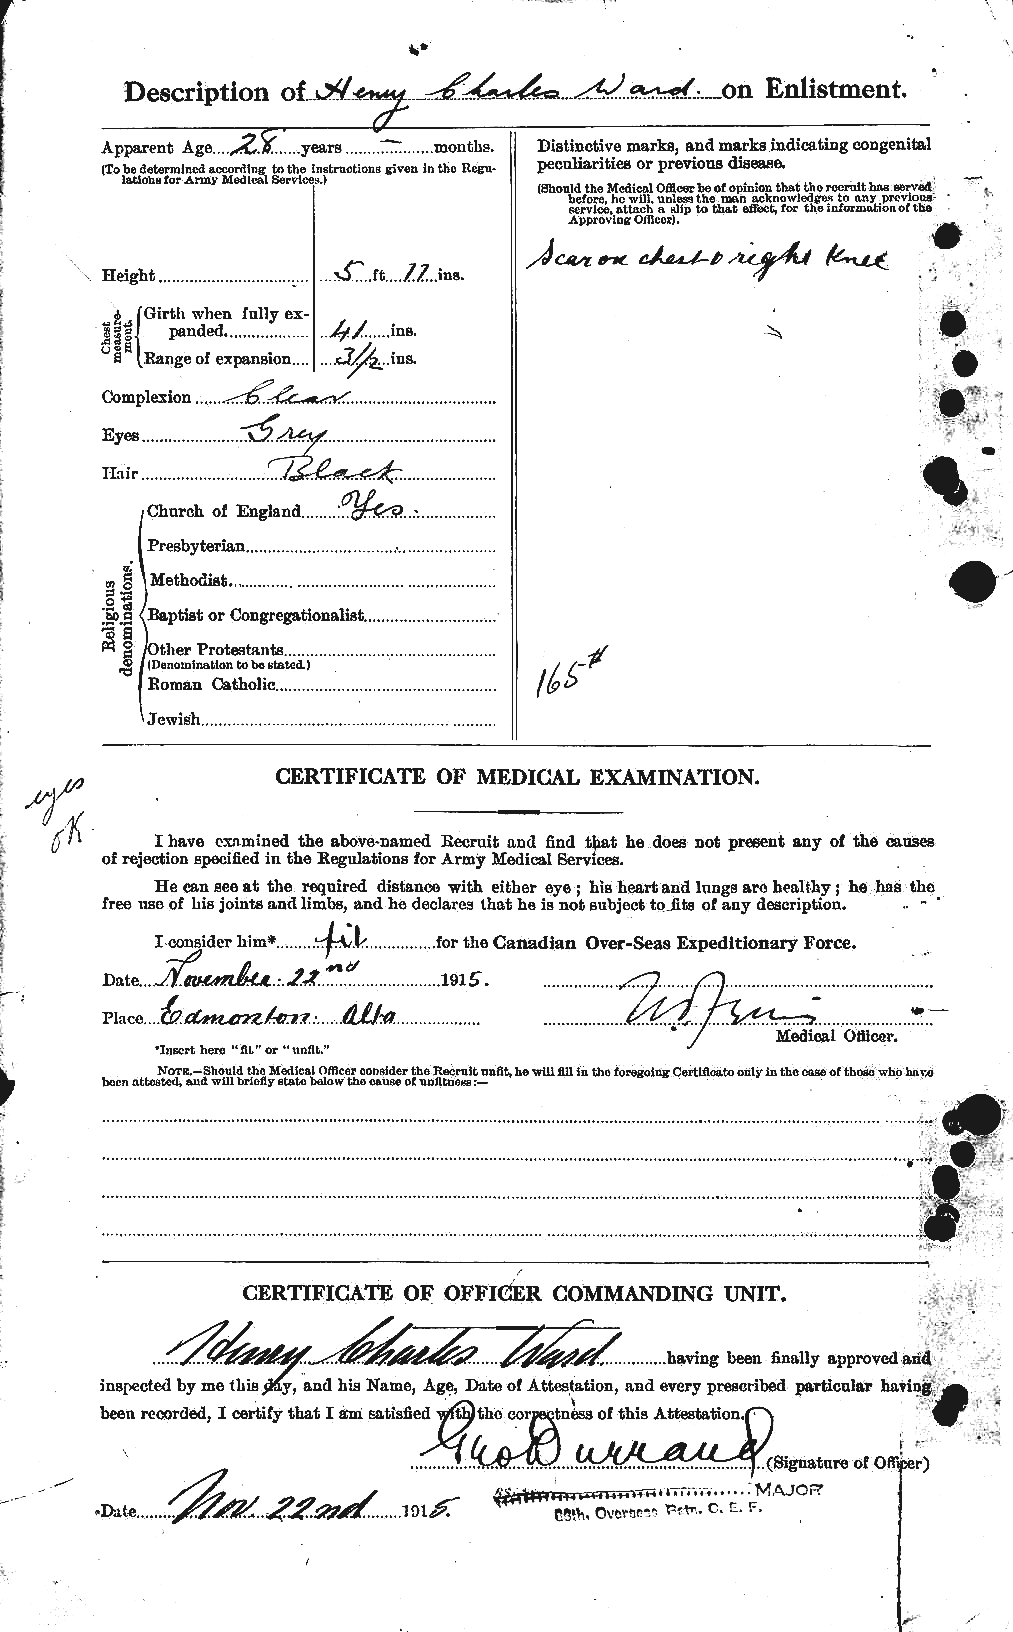 Personnel Records of the First World War - CEF 657832b